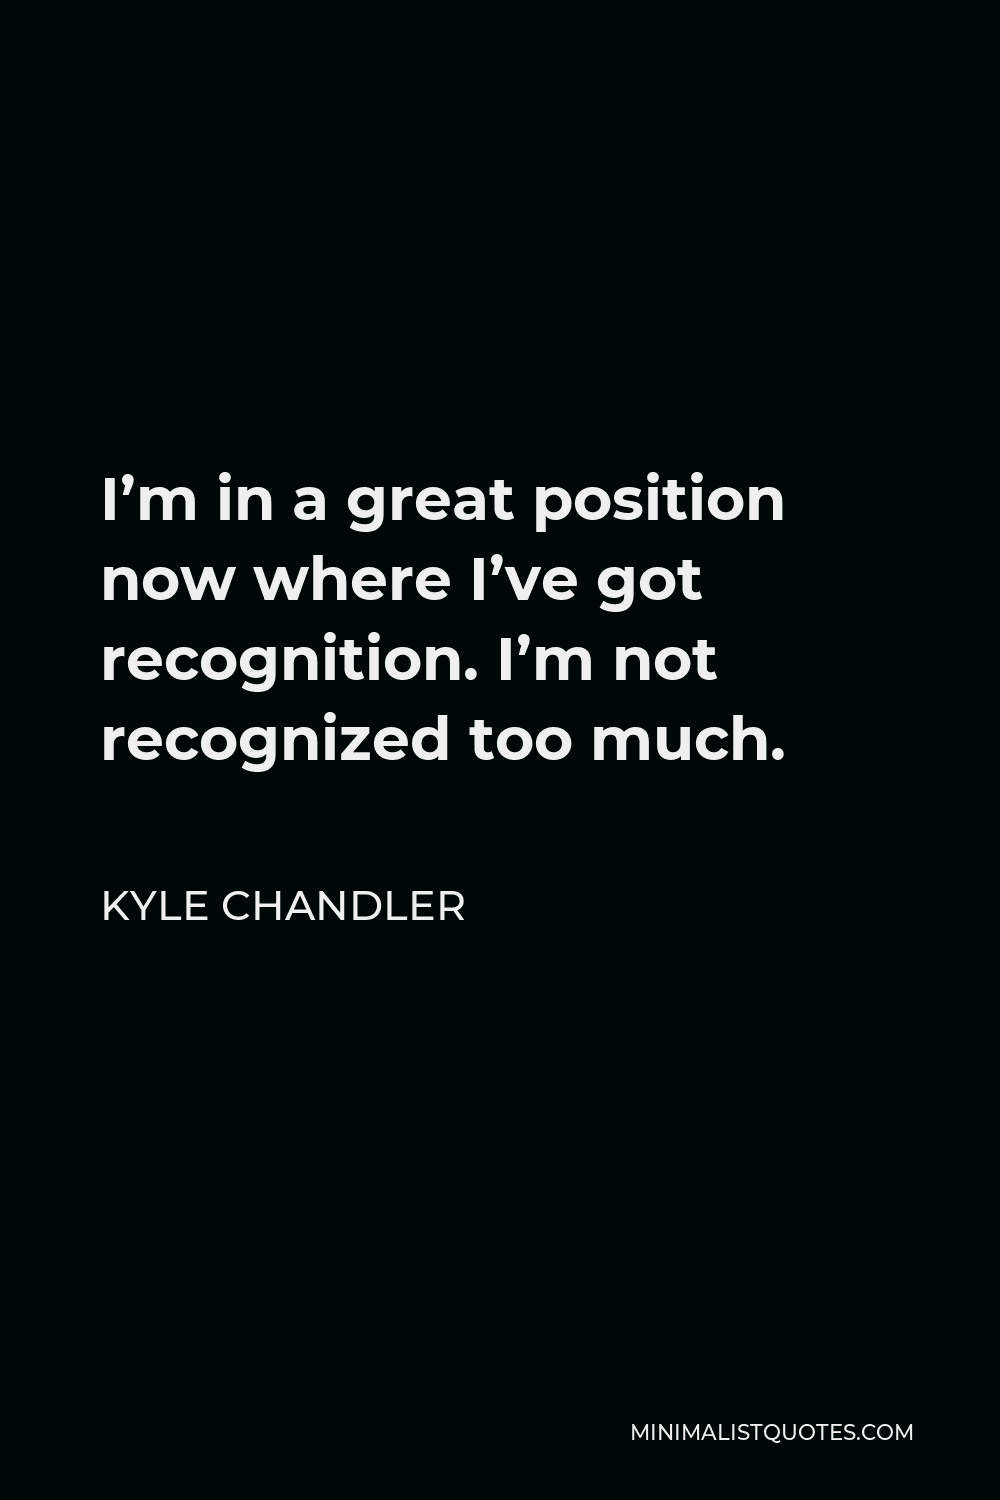 Kyle Chandler Quote - I’m in a great position now where I’ve got recognition. I’m not recognized too much.